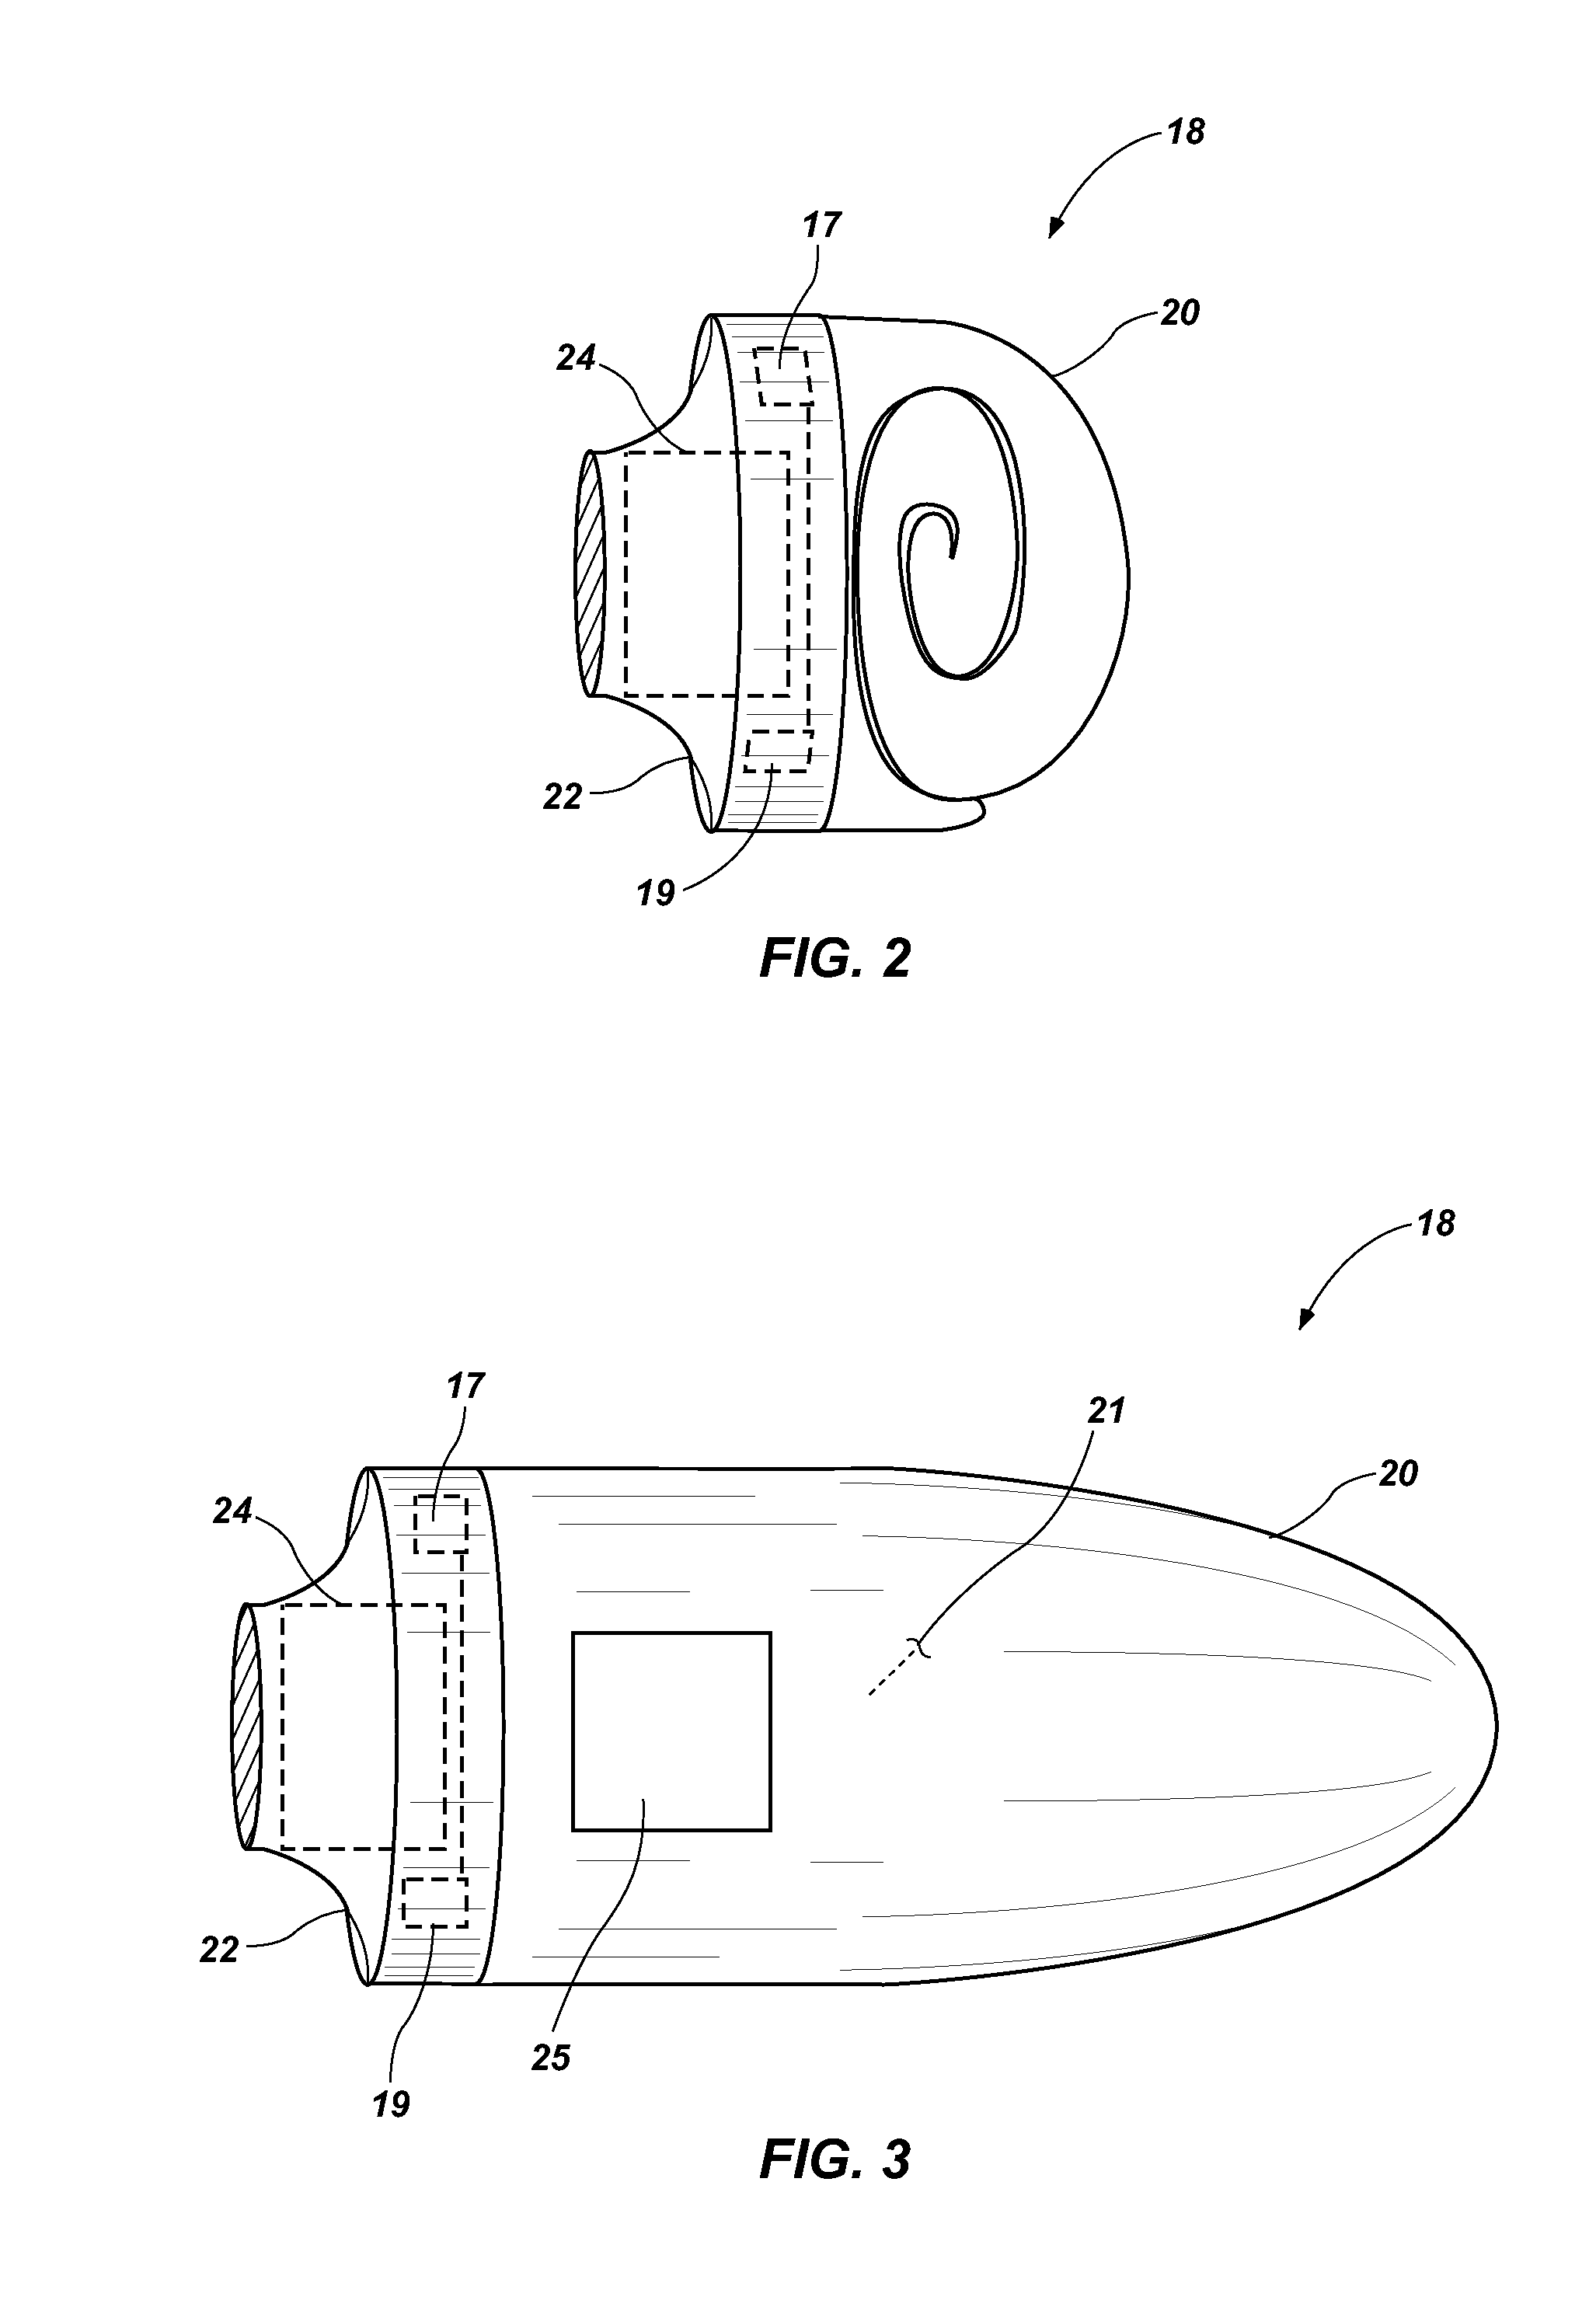 Liquid Missile Projectile For Being Launched From A Launching Device